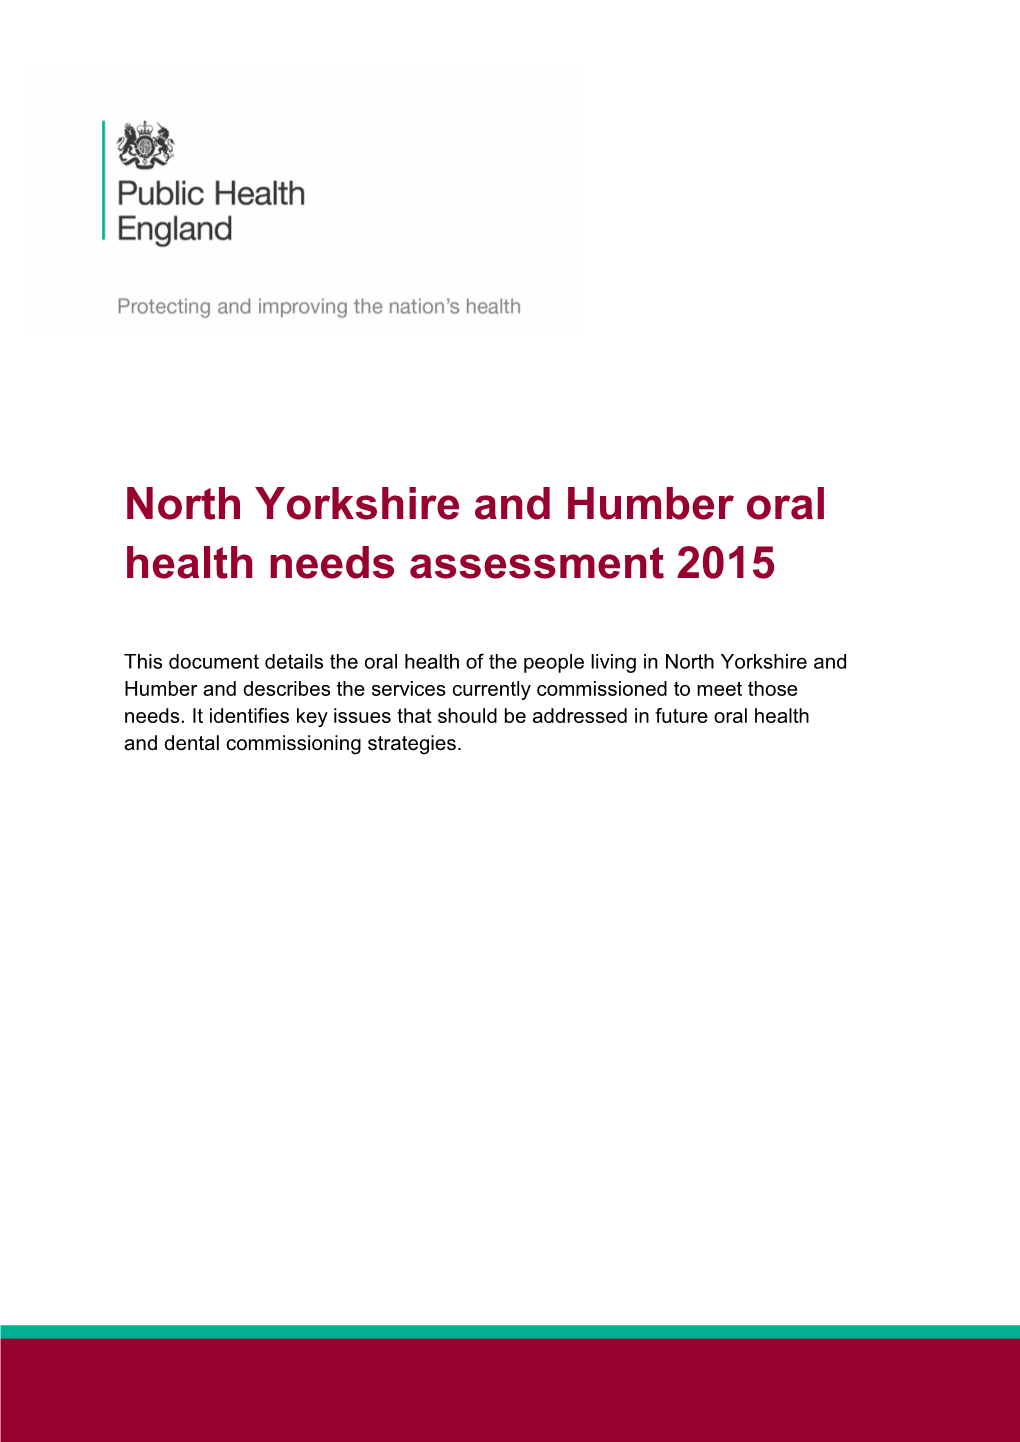 North Yorkshire and Humber Oral Health Needs Assessment 2015